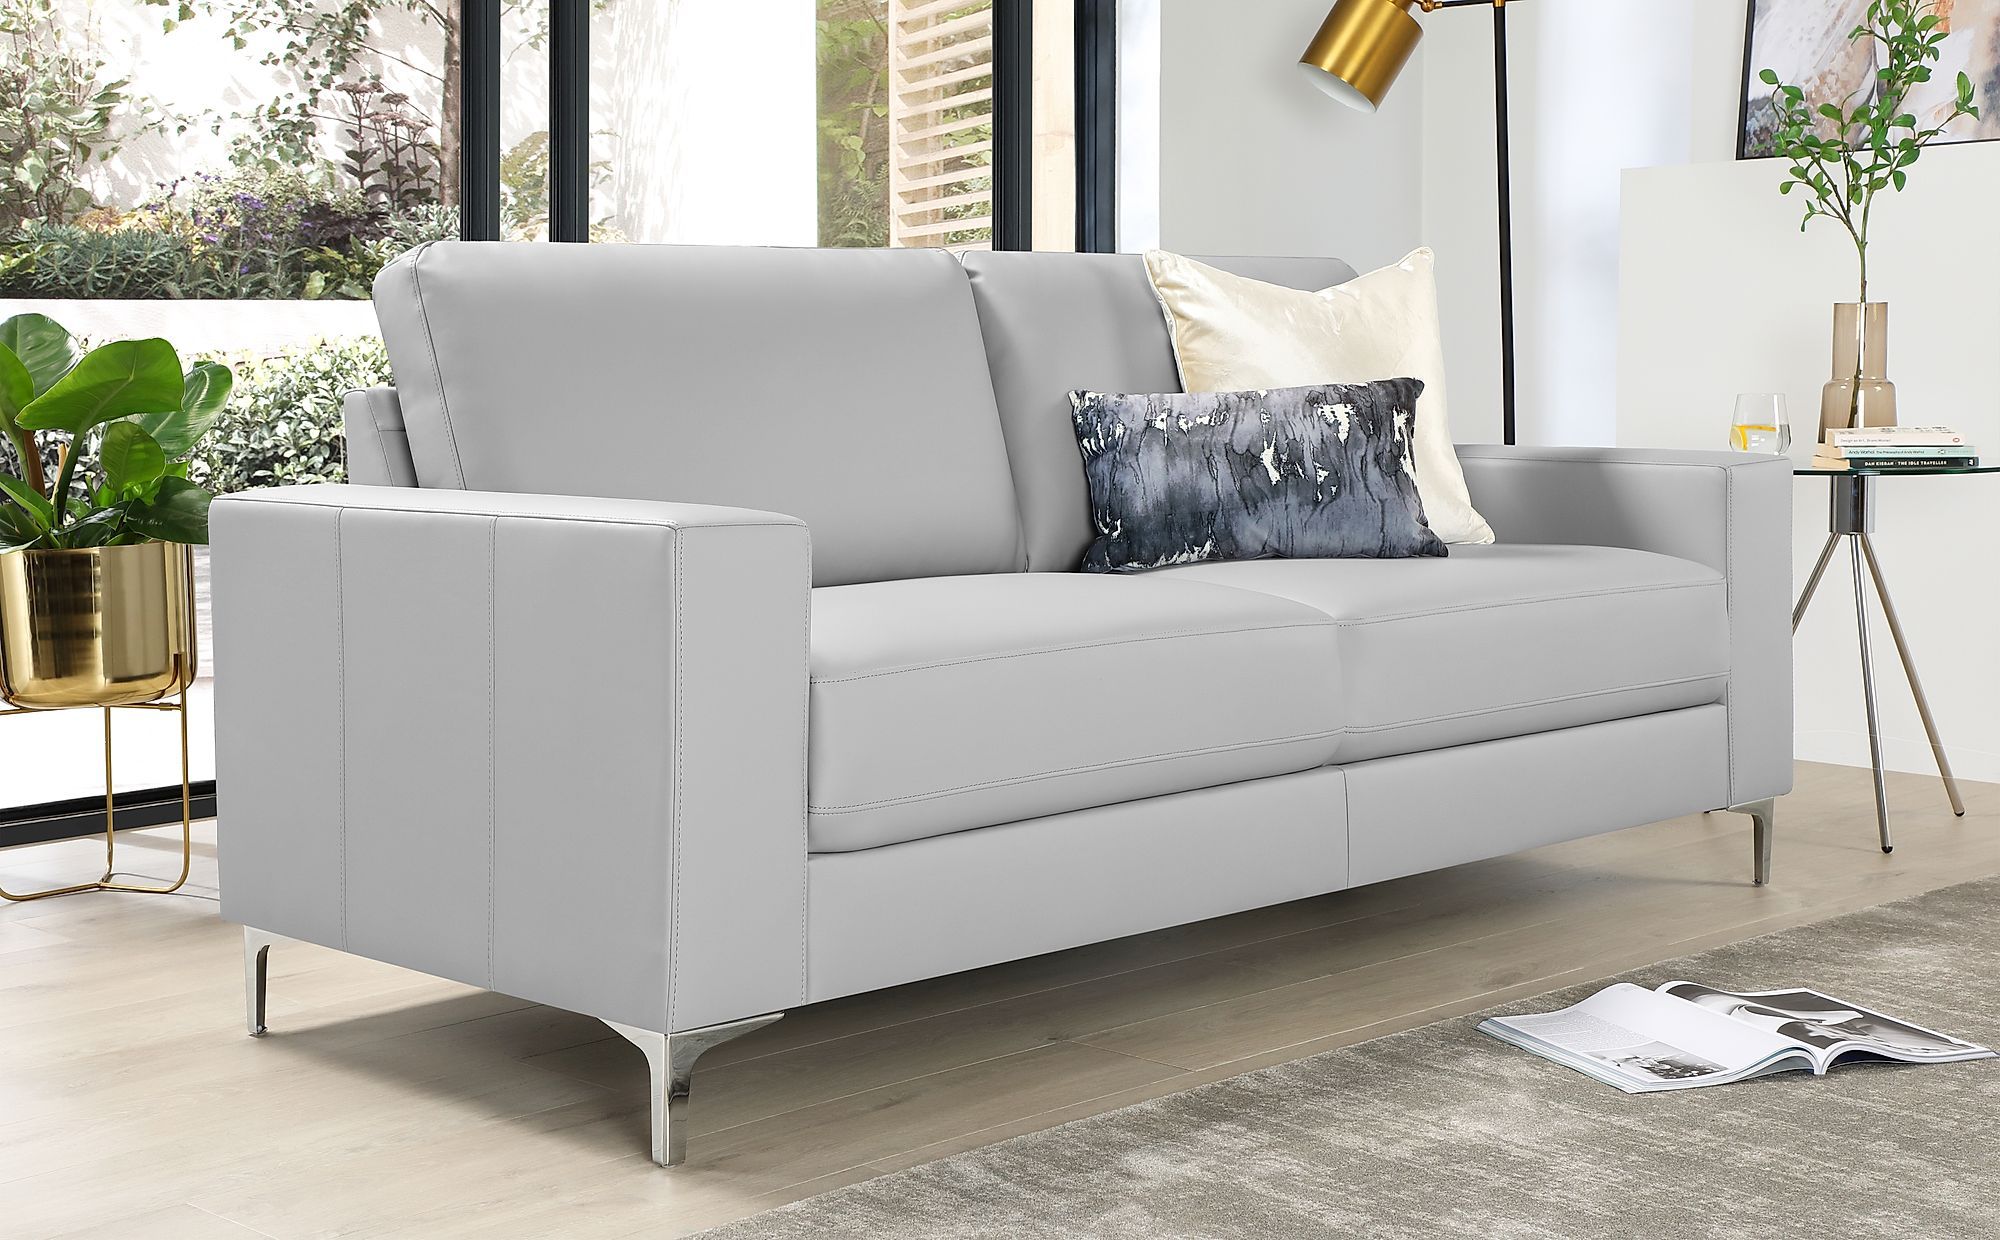 Baltimore Light Grey Leather 3 Seater Sofa | Furniture Choice Throughout Sofas In Light Gray (View 3 of 22)